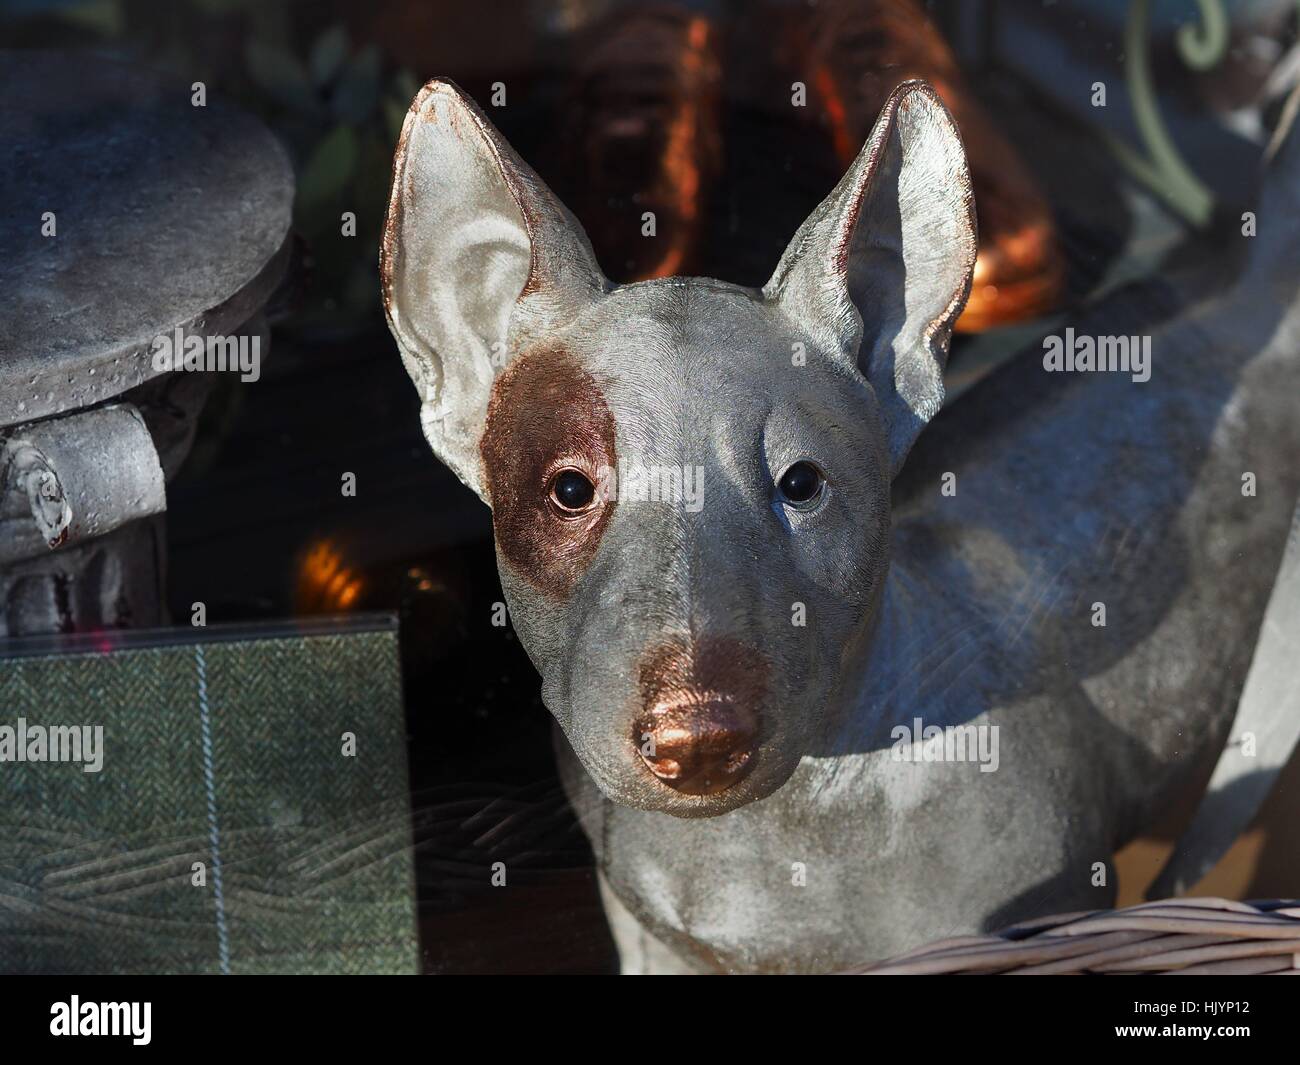 Photo series 'dogs in Berlin' -  A cheese dog figure of a bull terrier is seen in the window of a furniture shop in Berlin on February 15, 2016. Berlin is often called the 'capital of dogs'. This picture is part of a long-term project on dogs in Berlin. Ph | usage worldwide Stock Photo